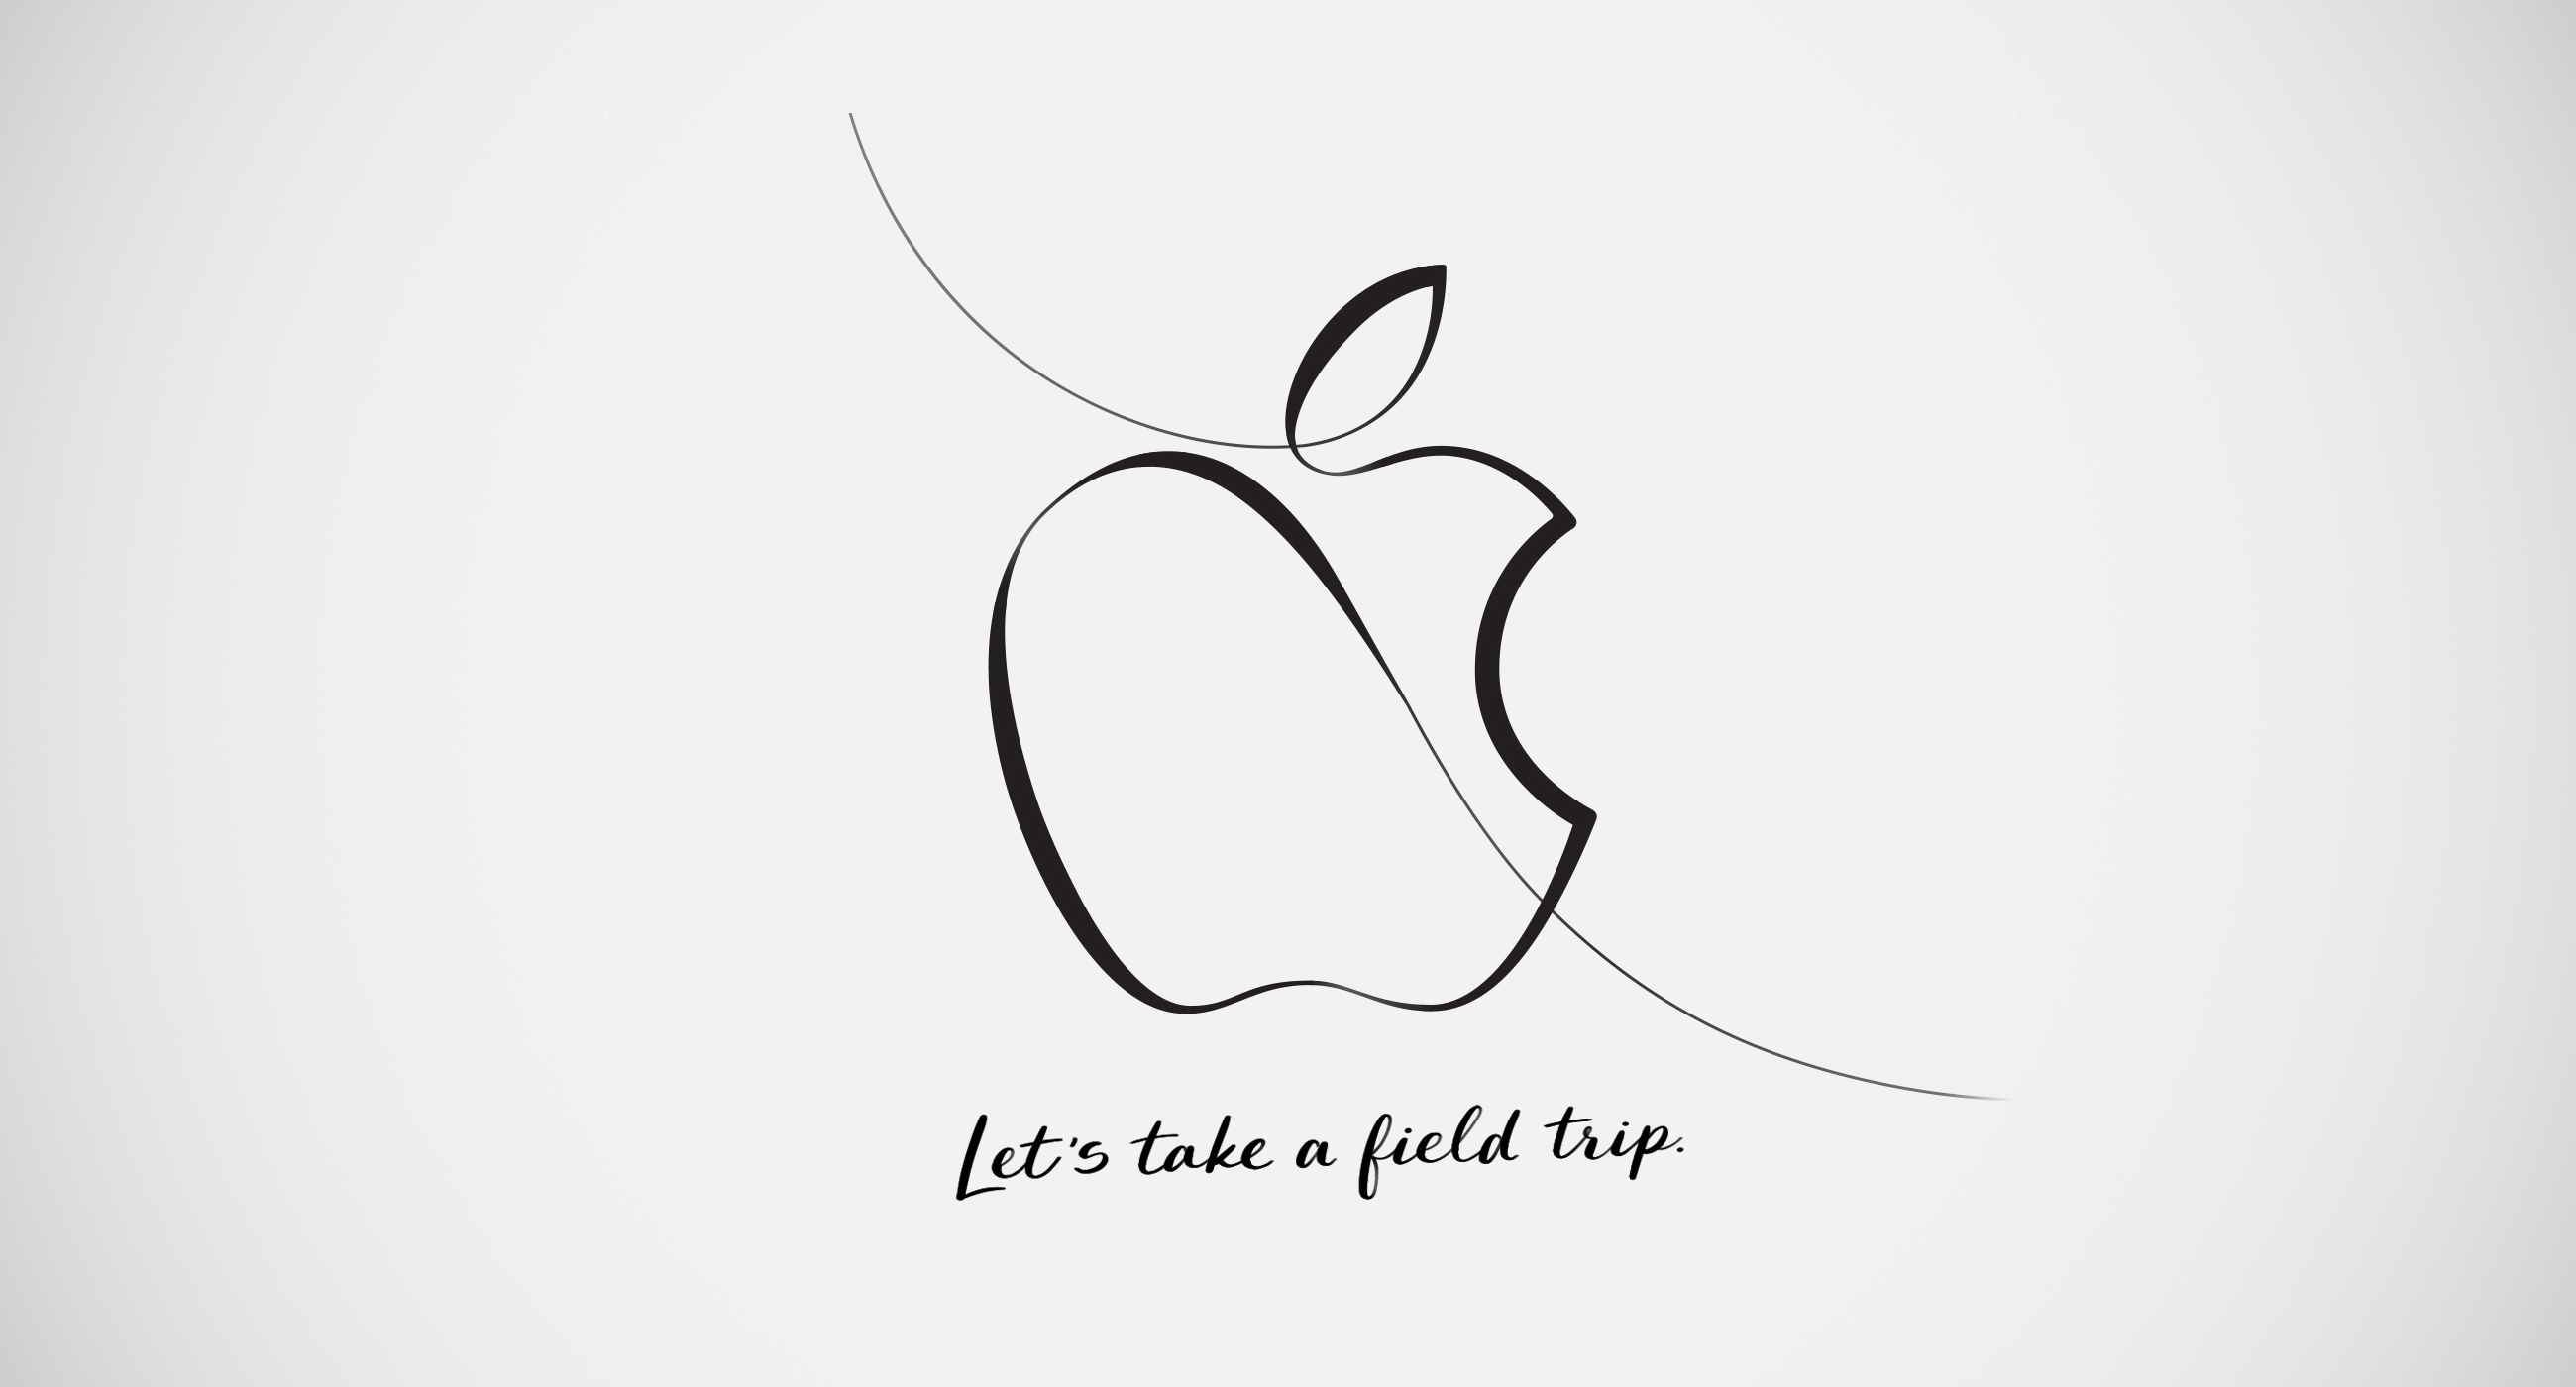 What to expect from Apple's education-themed 'Field Trip' event